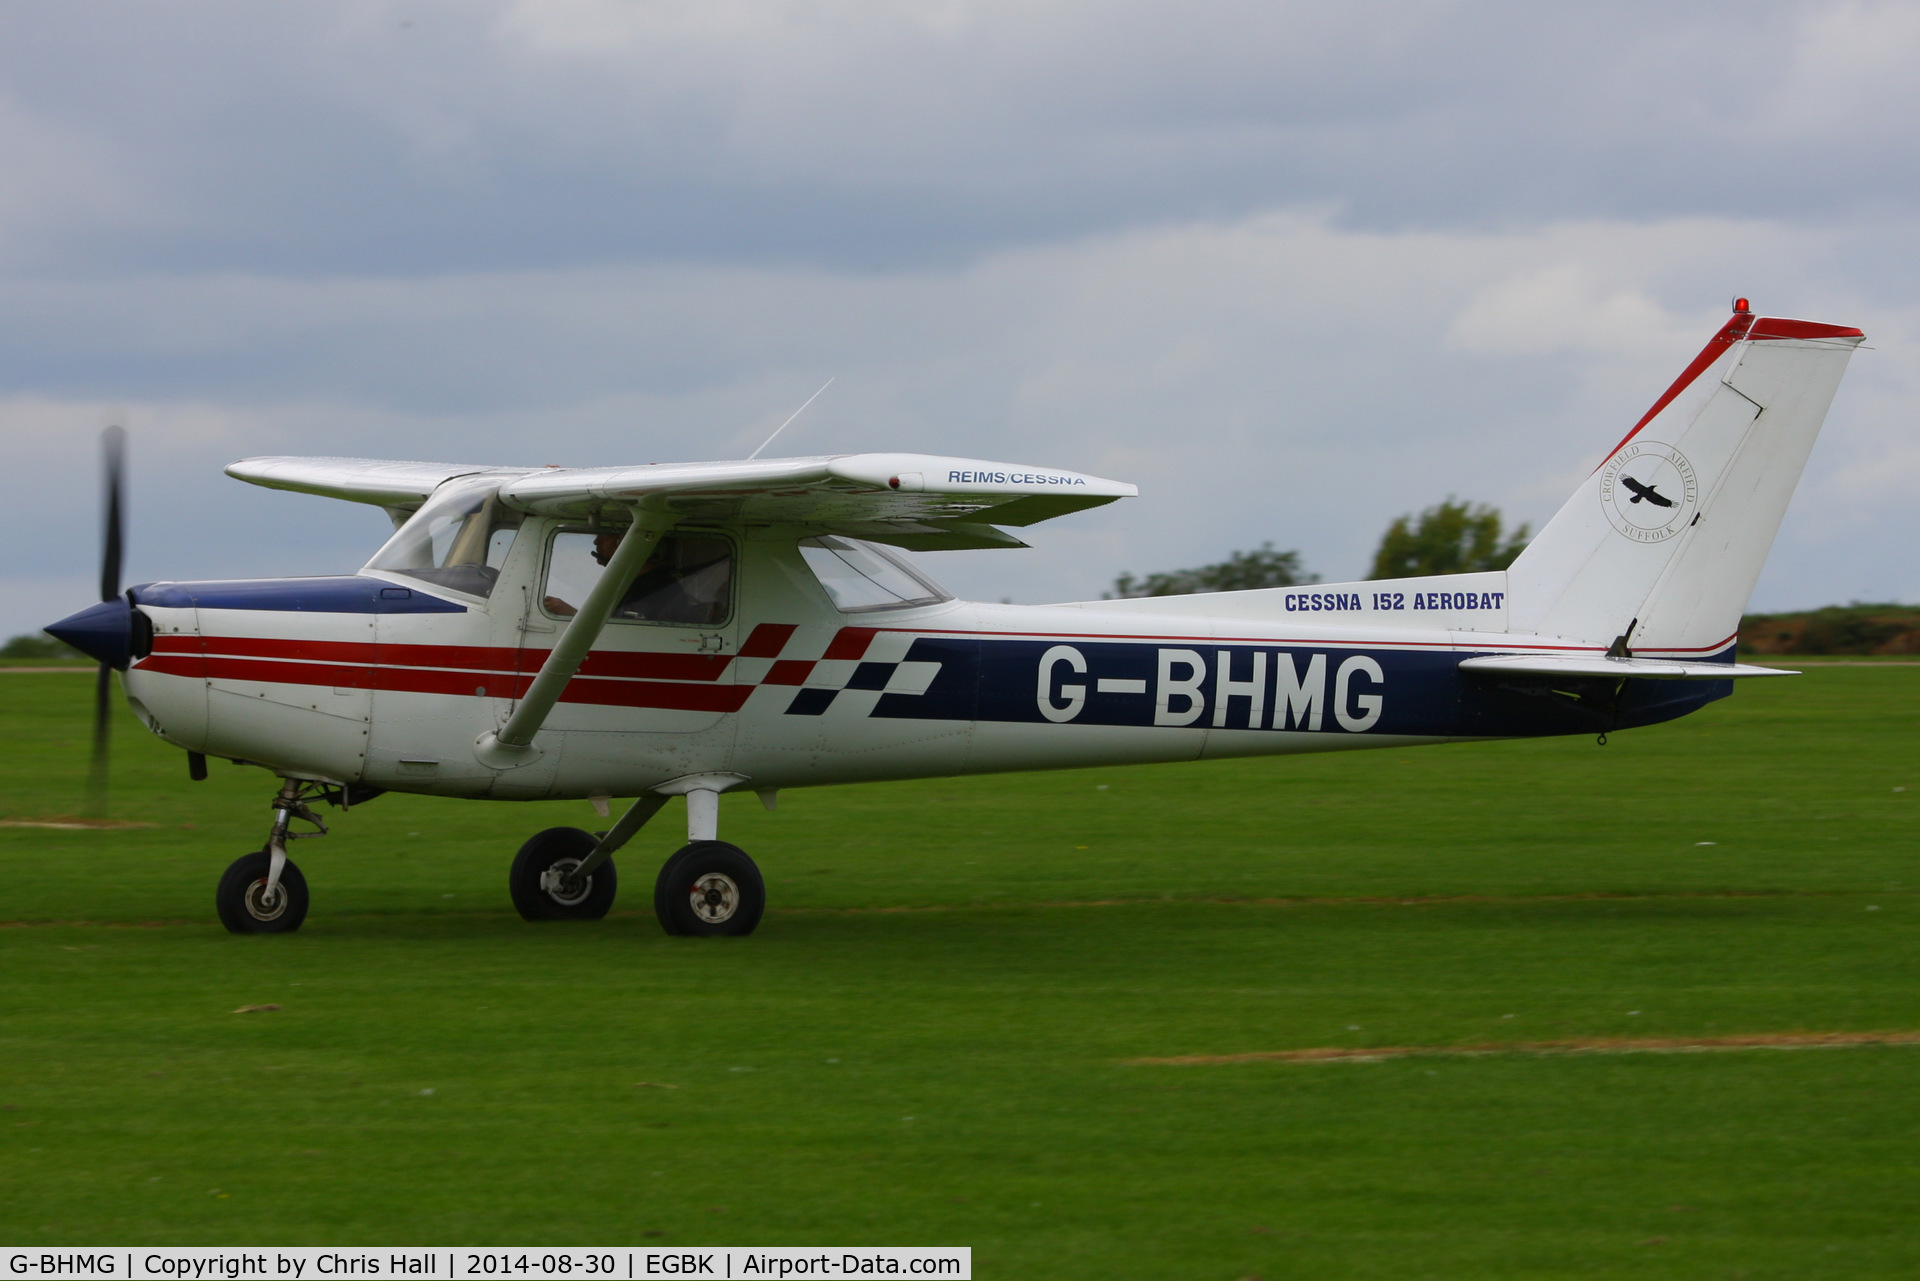 G-BHMG, 1980 Reims FA152 Aerobat C/N 0368, at the LAA Rally 2014, Sywell